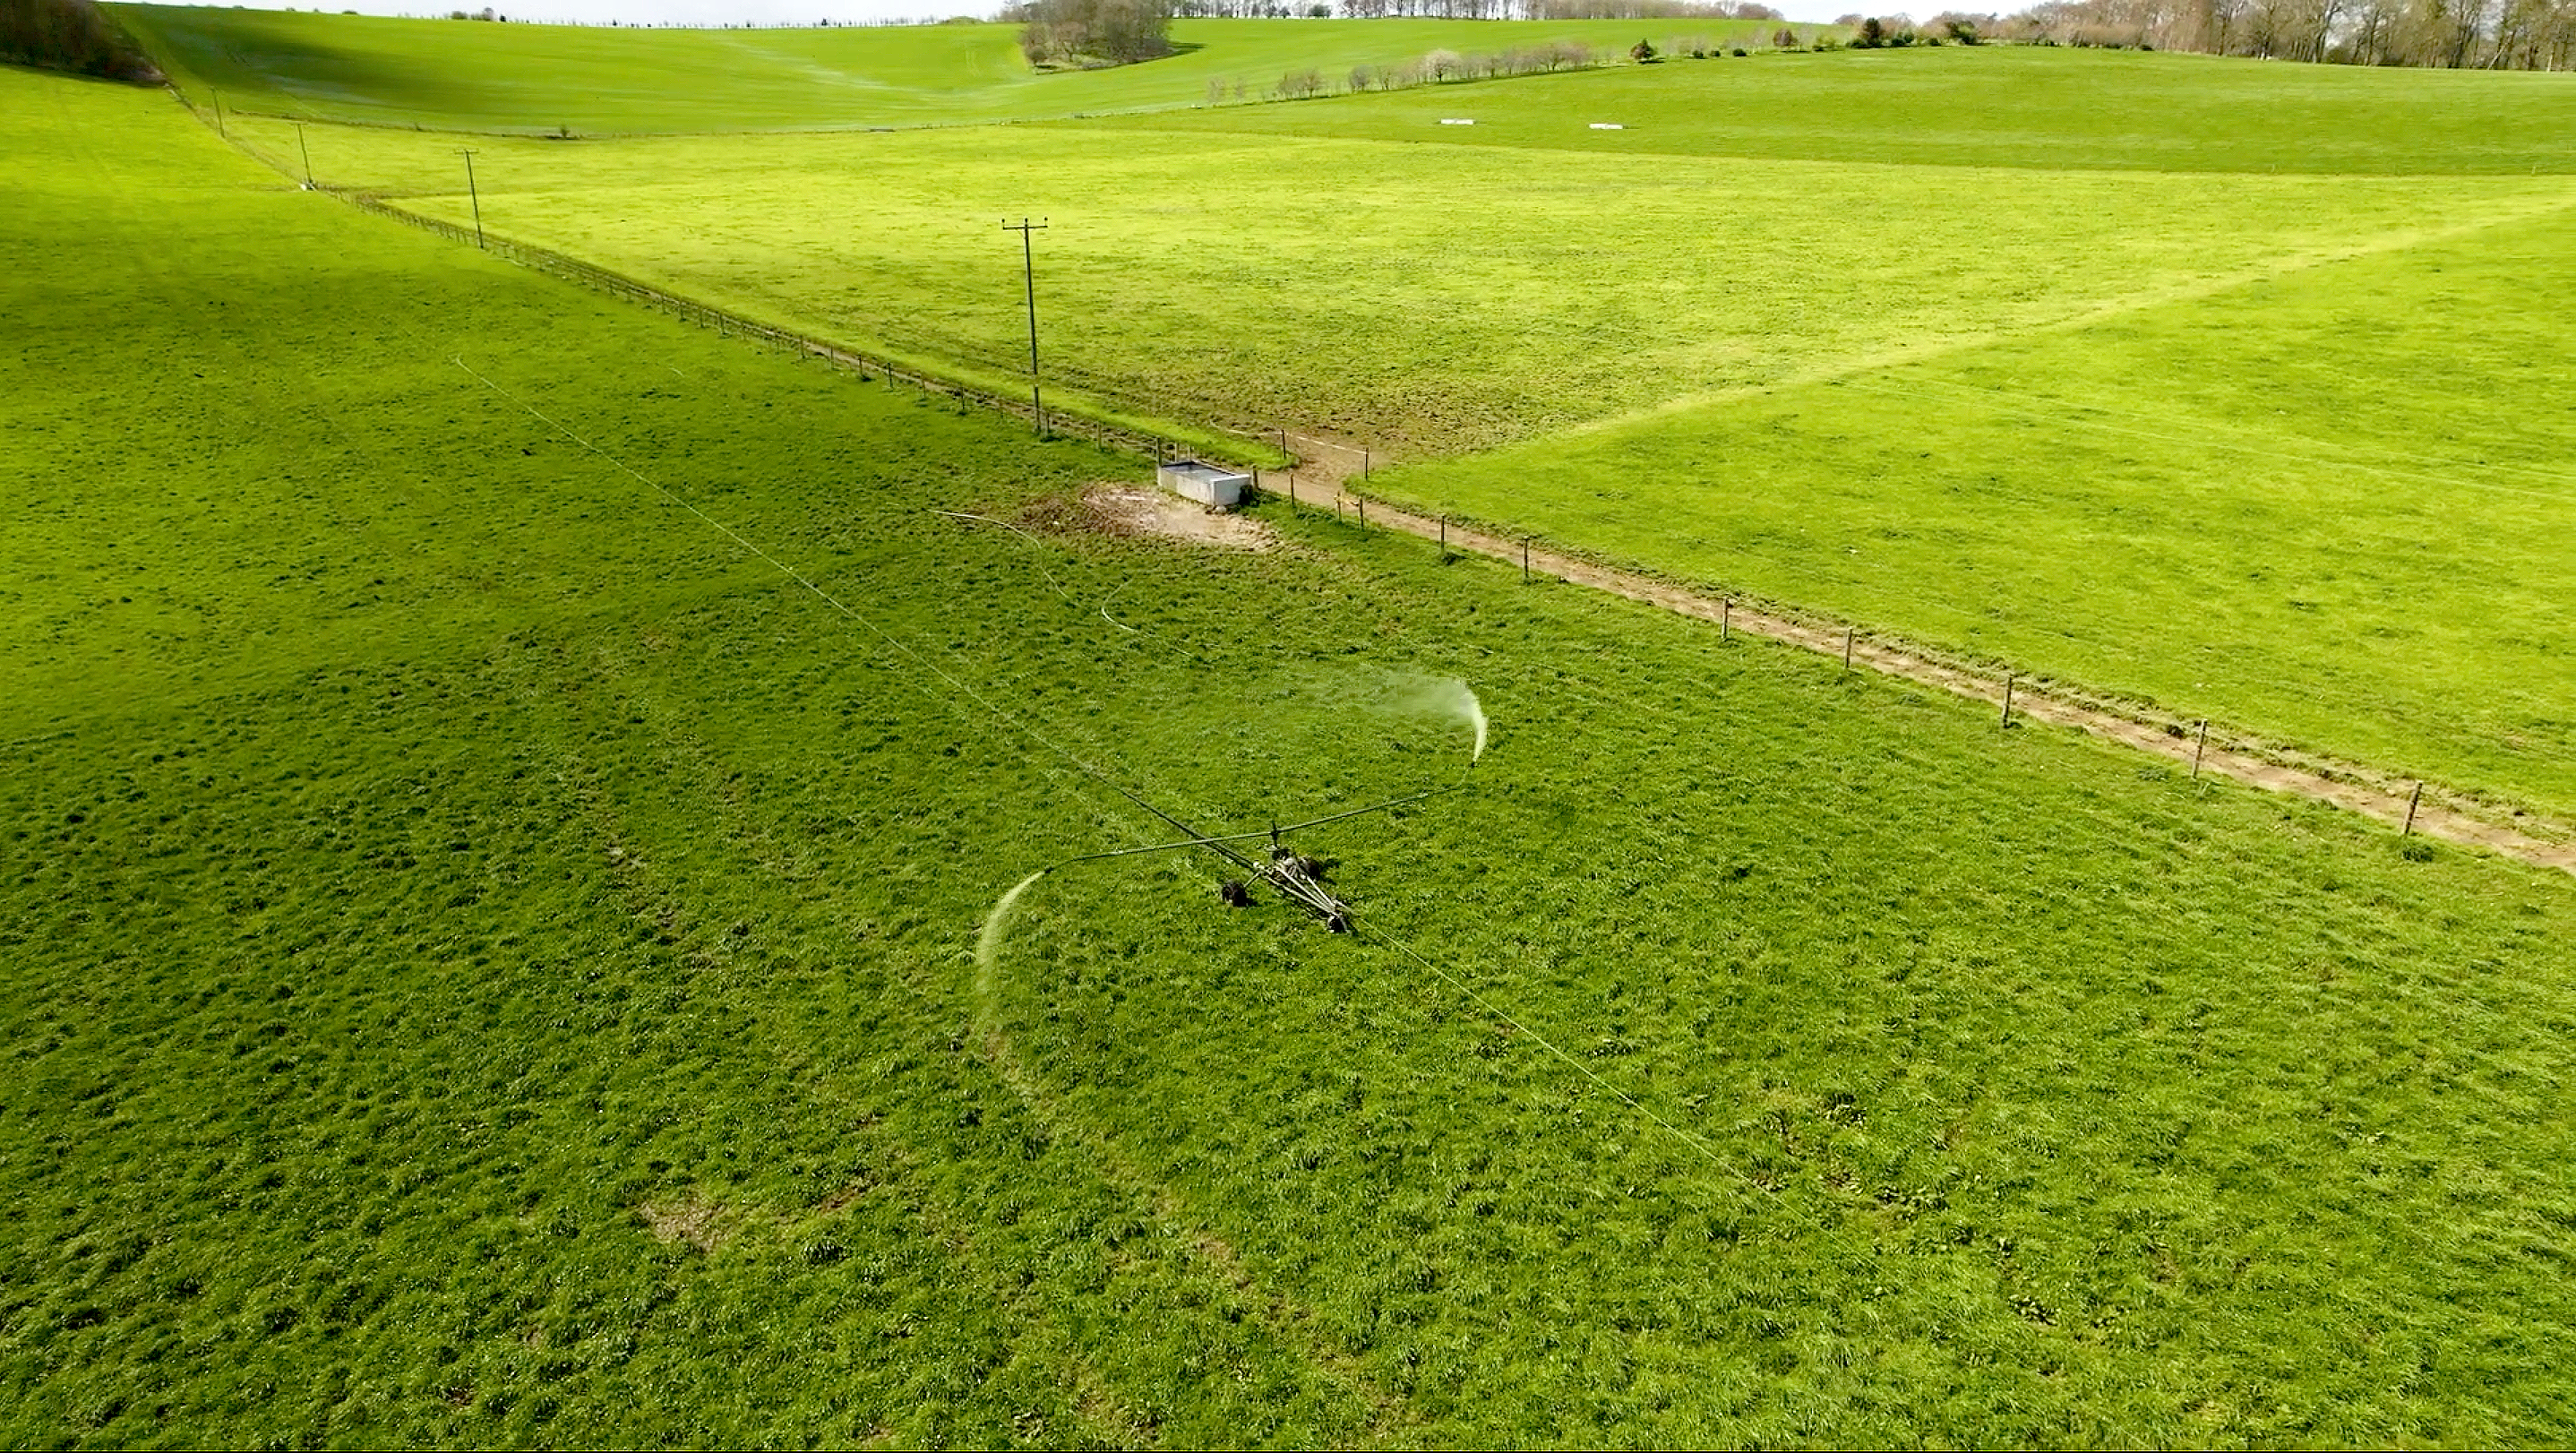 AgTech partnership announce world-first technology that enables farmers to measure grass from space